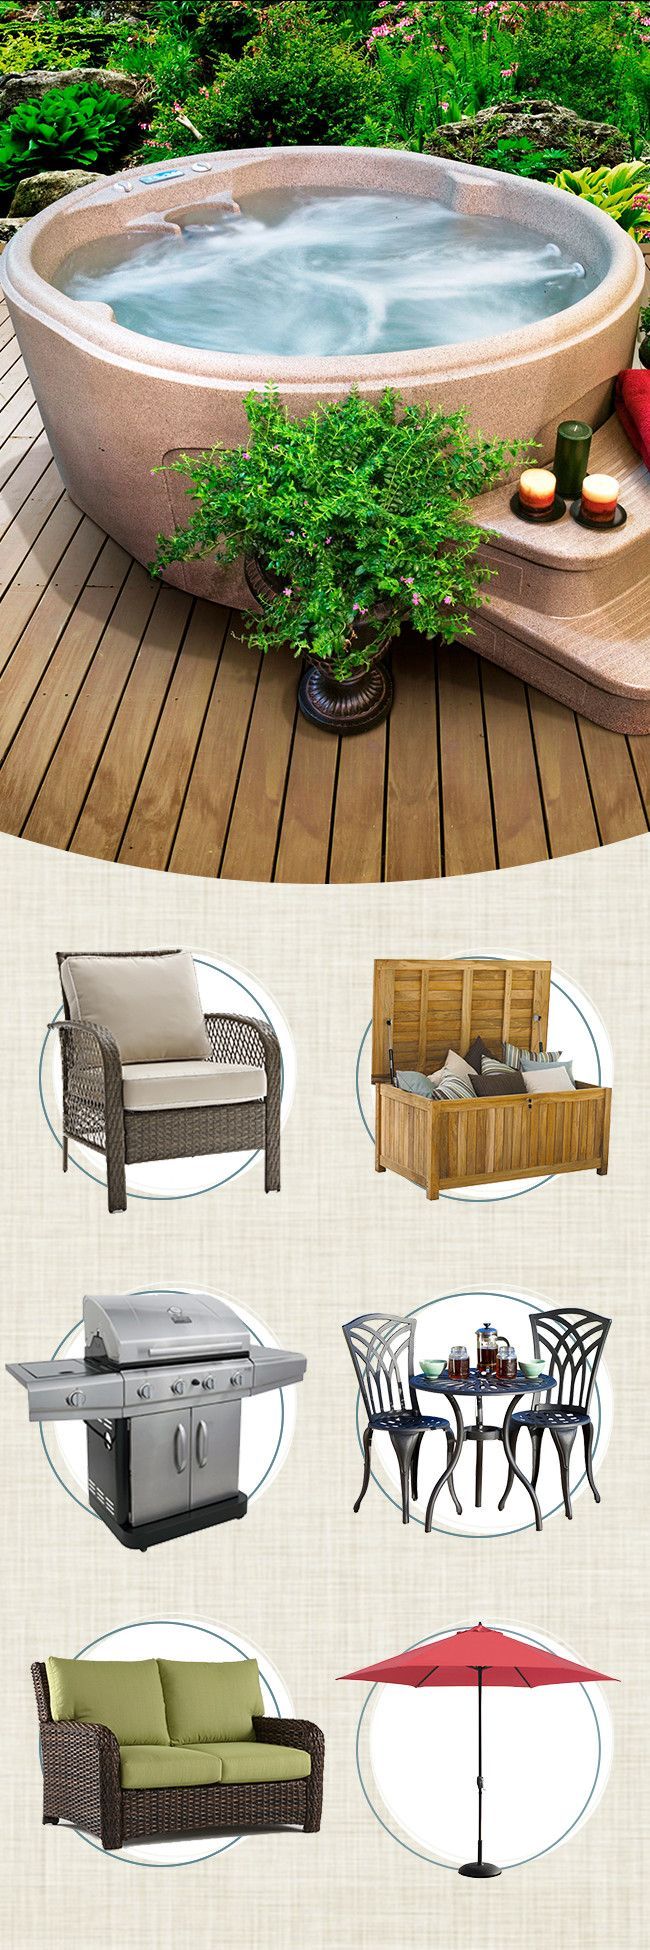 Whatever the size and style you're looking for, browse our selection of first rate above ground pools and tubs. Relax in style with a wide selection of outdoor furniture and more. Visit Wayfair and sign up today to get access to exclusive deals everyday up to 70% off. Free shipping on all orders over $49. -   17 garden design Stones walks
 ideas